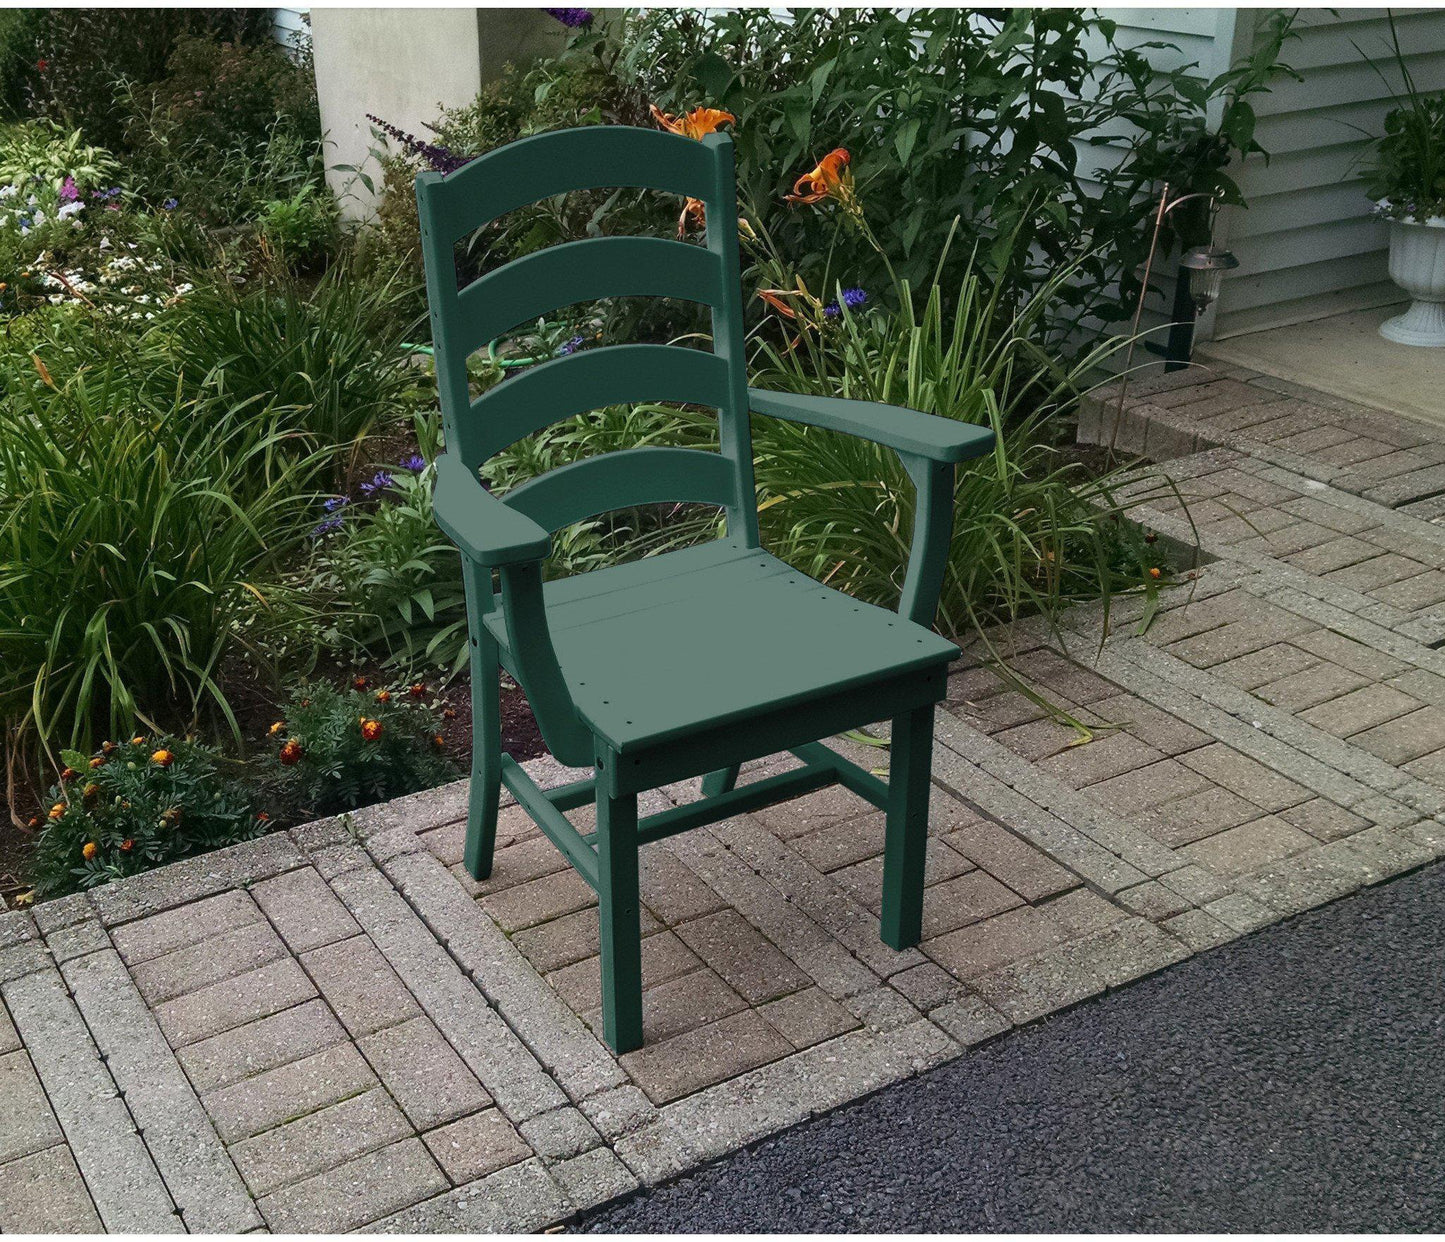 A&L Furniture Company Recycled Plastic Ladderback Dining Chair w/ Arms - Turf Green